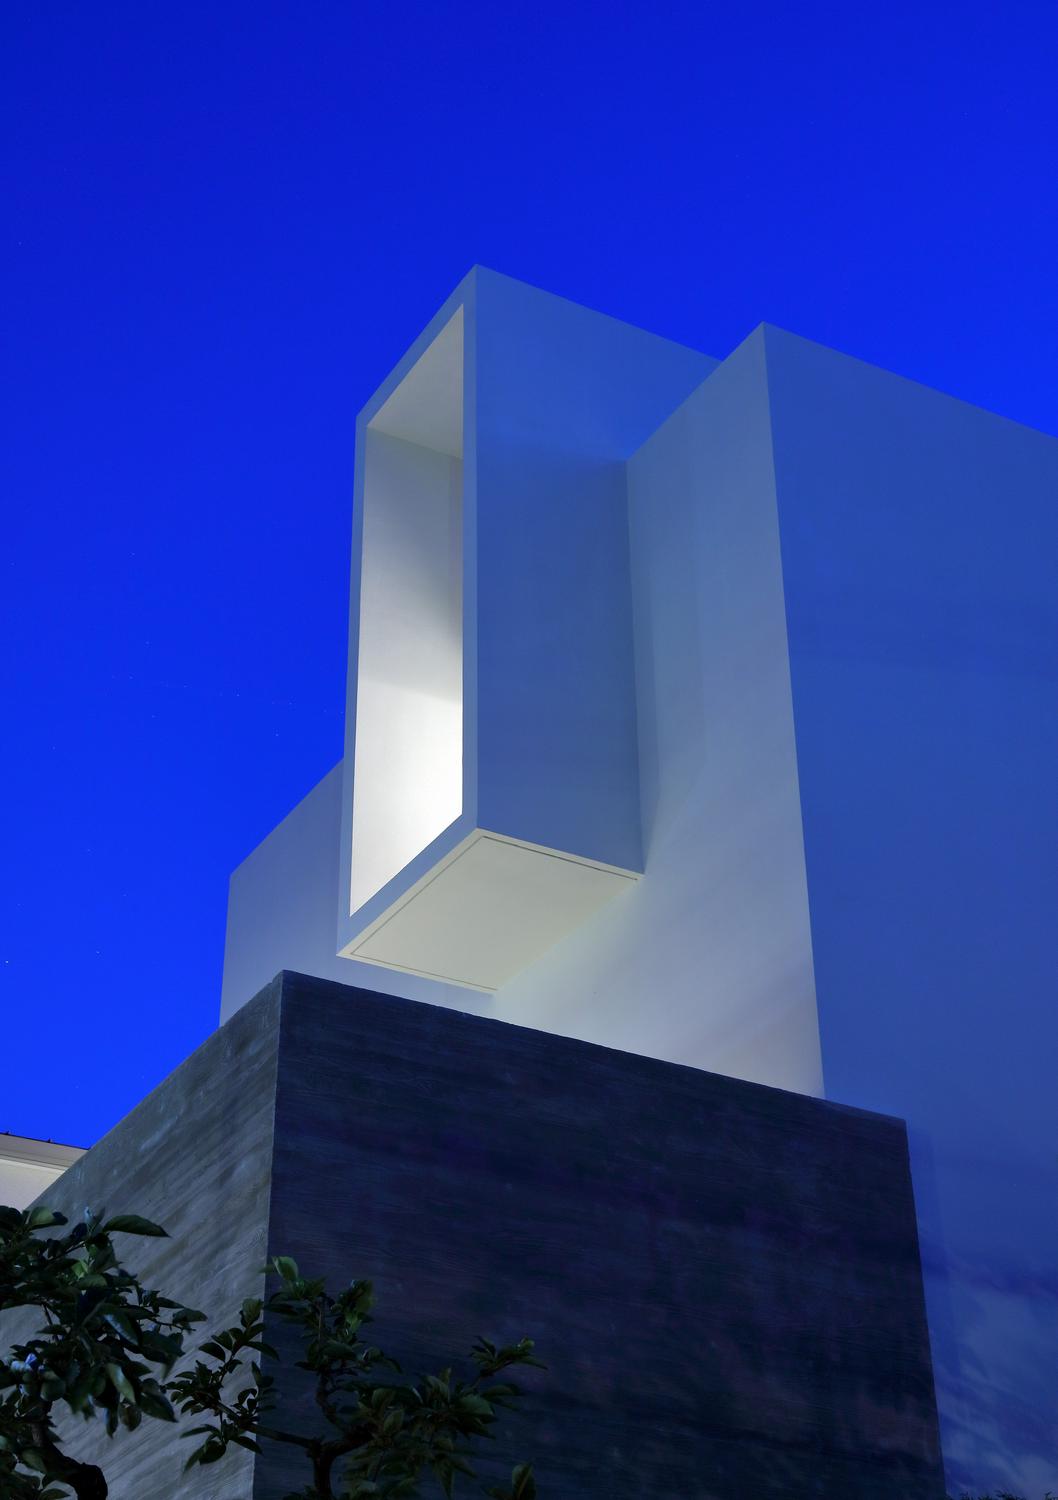 Image of "MDCE", the work by architect : Eitaro Satake (image number 3)